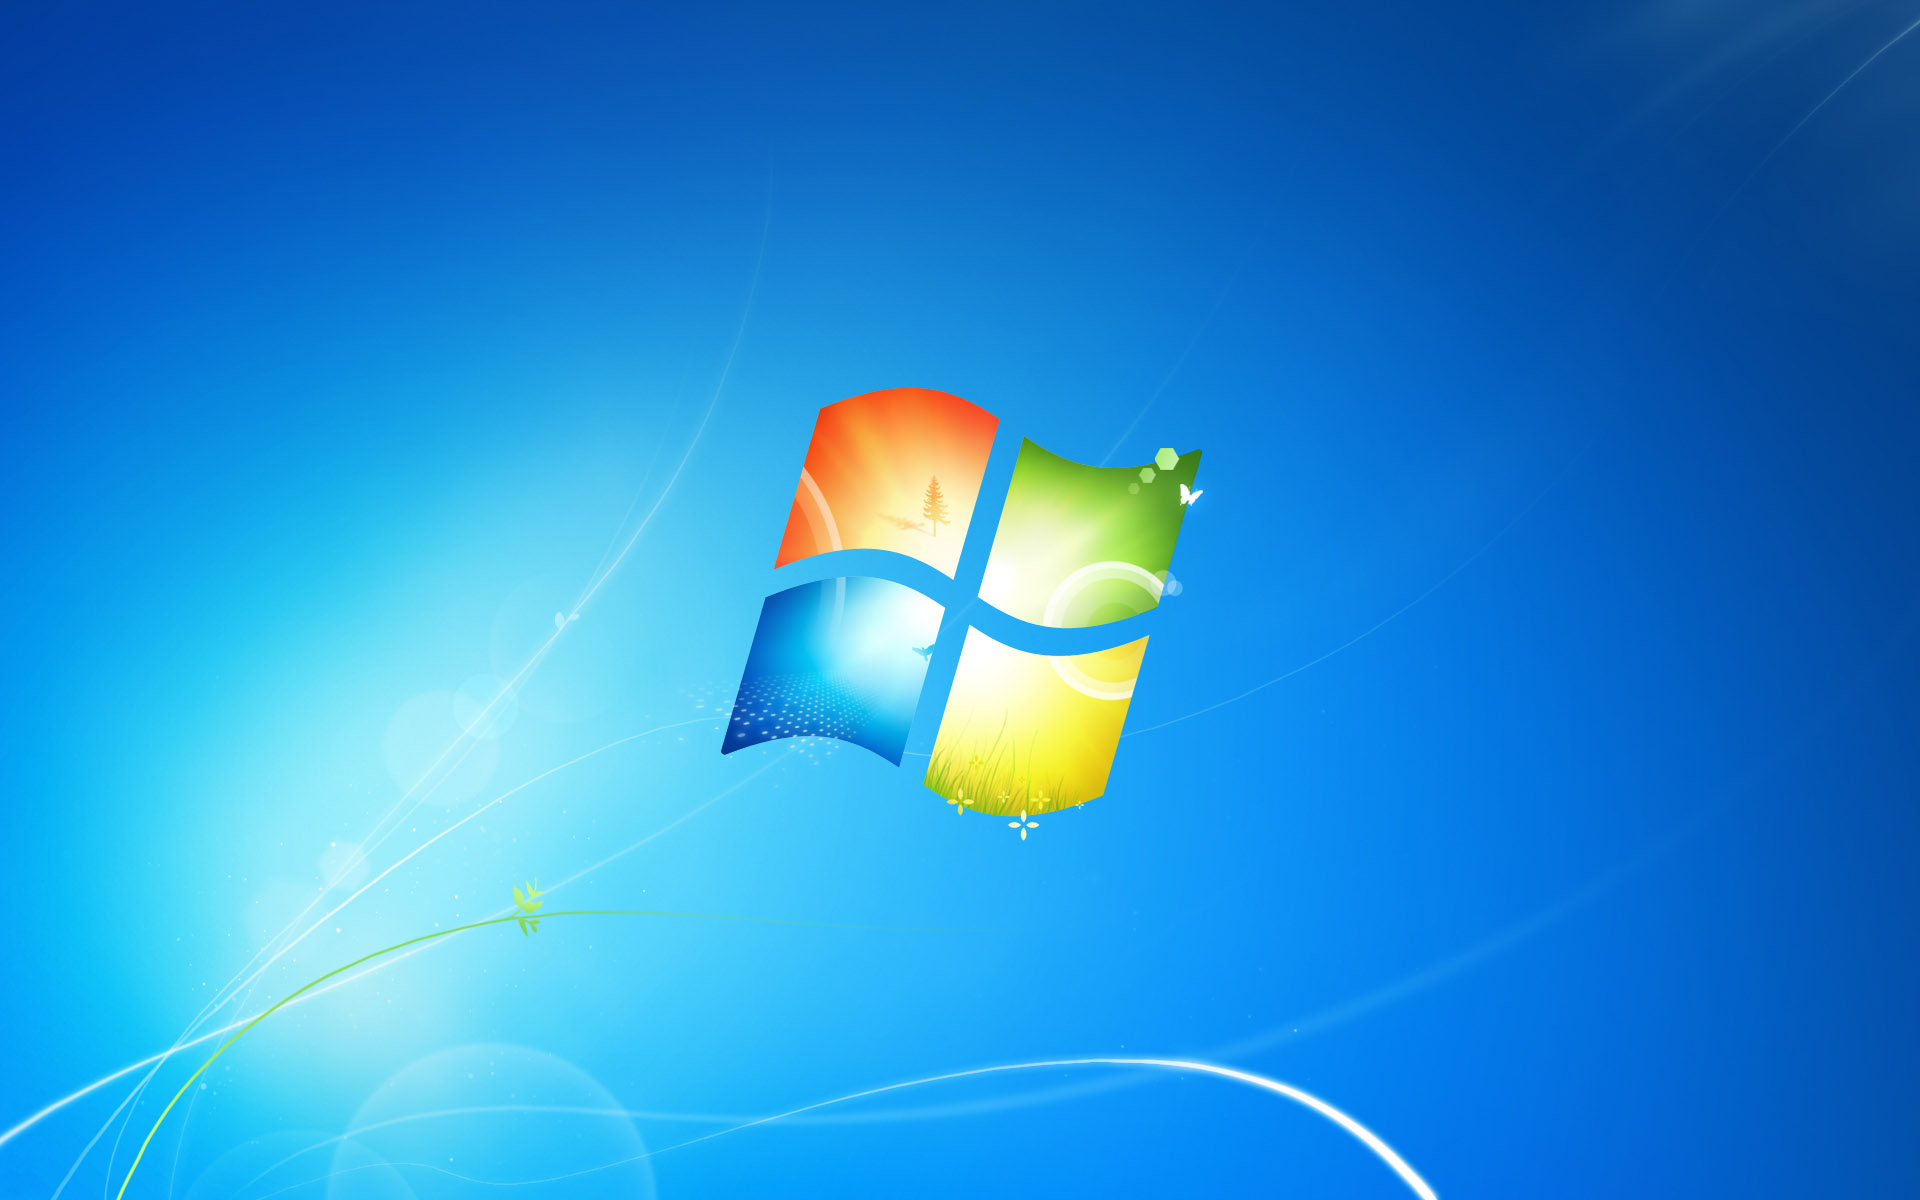 Cool Windows Backgrounds 1